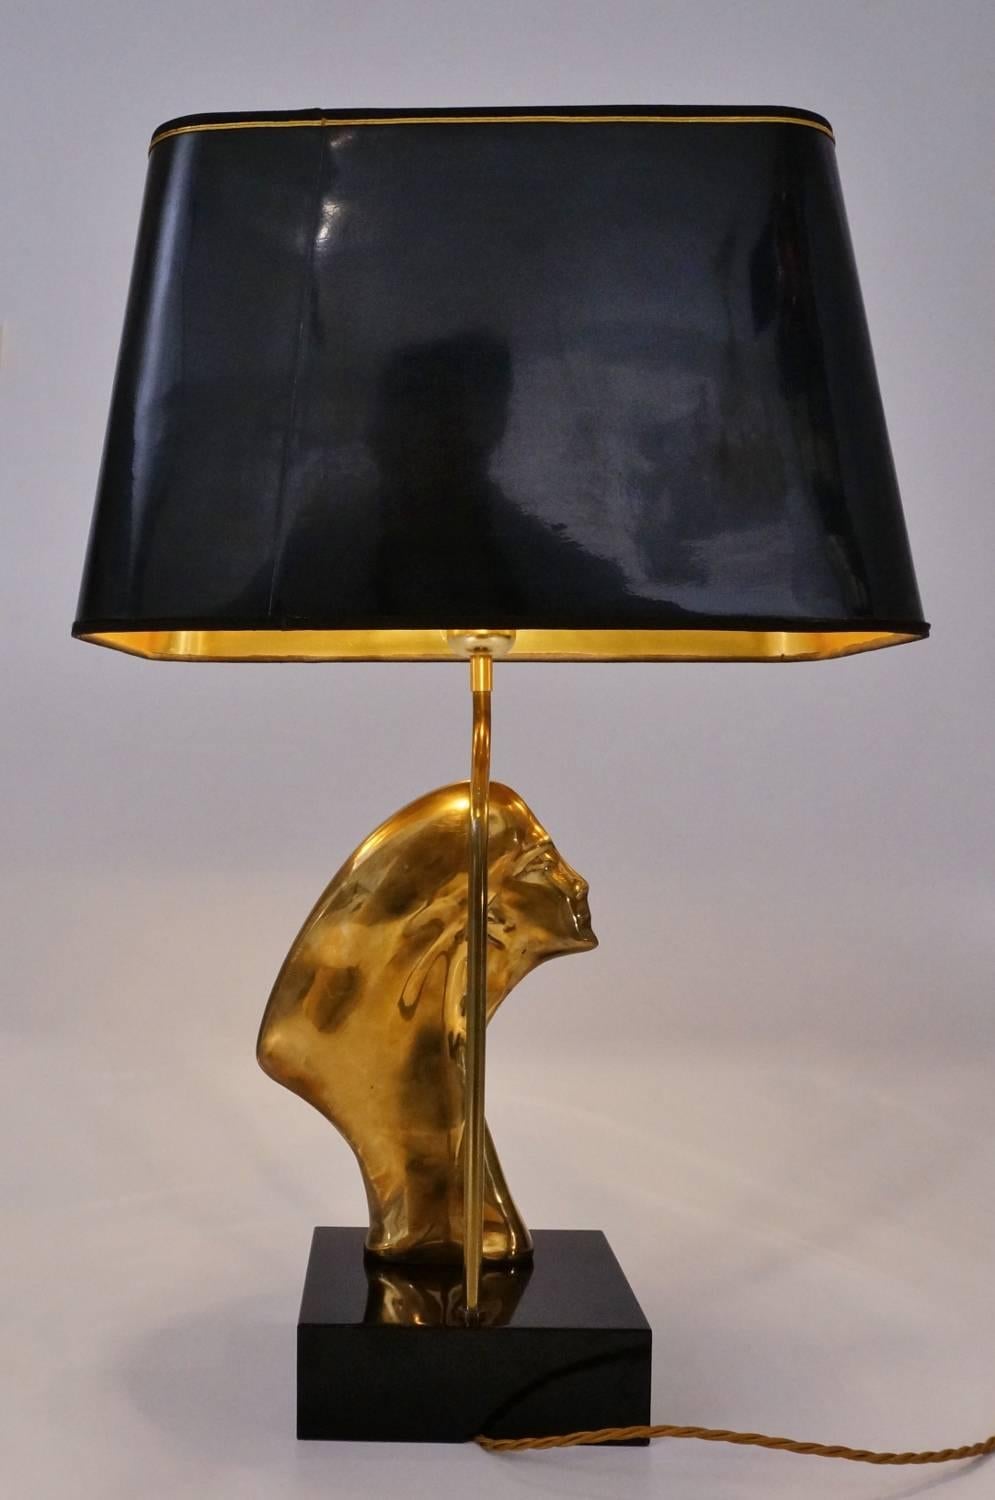 Lacquered 'Spirit of Ecstasy' Sculptural Brass Lamp, French, circa 1970s